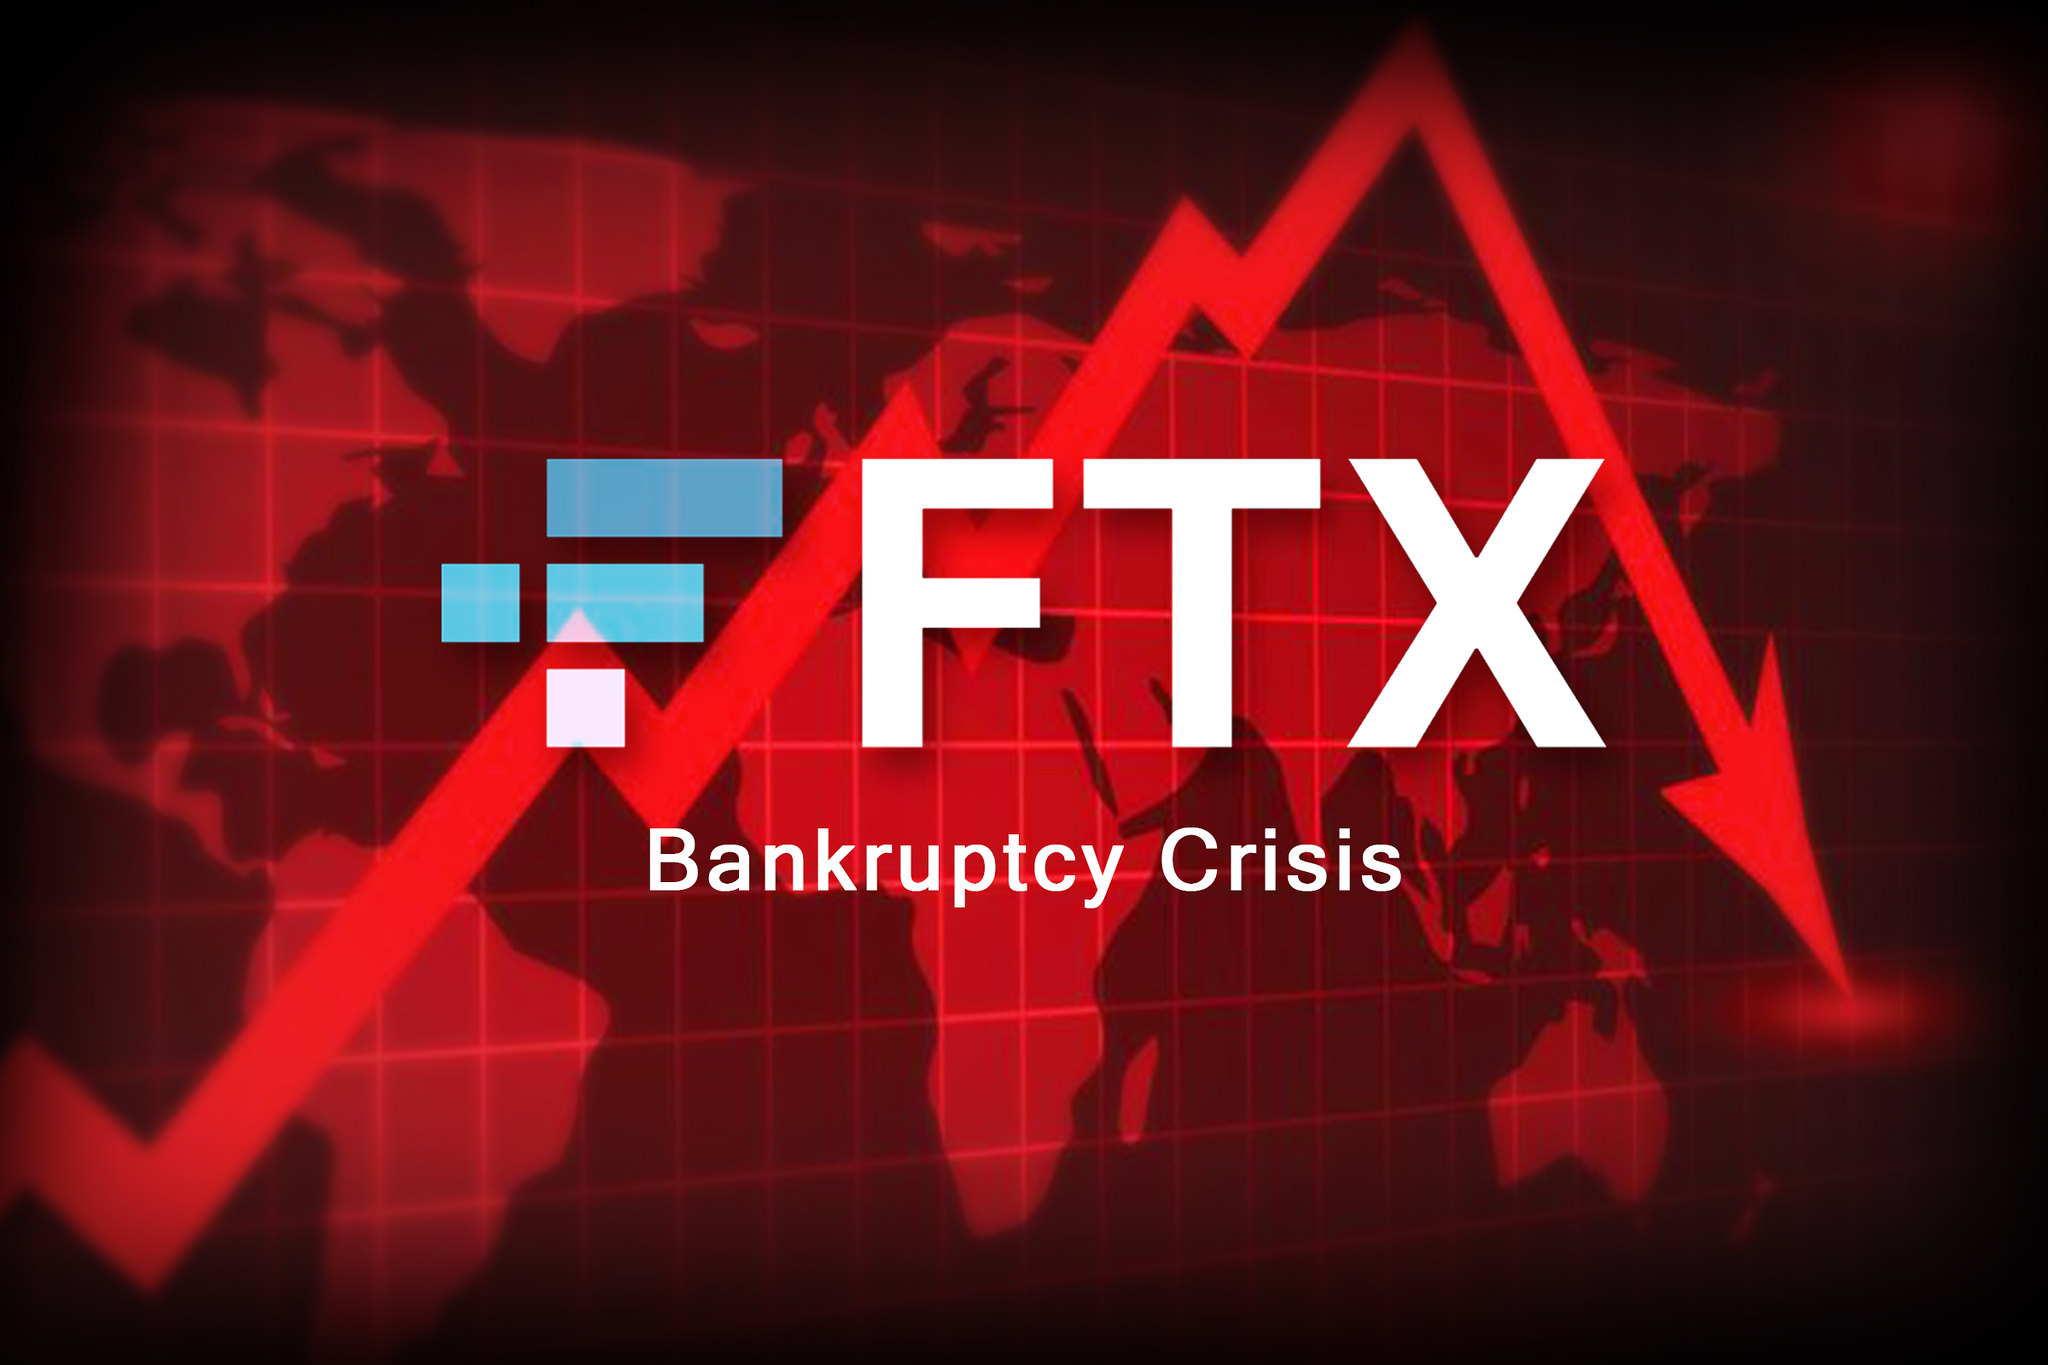 FTX Bankruptcy Claims Skyrocket as Company Recovers $7.3 Billion in Assets